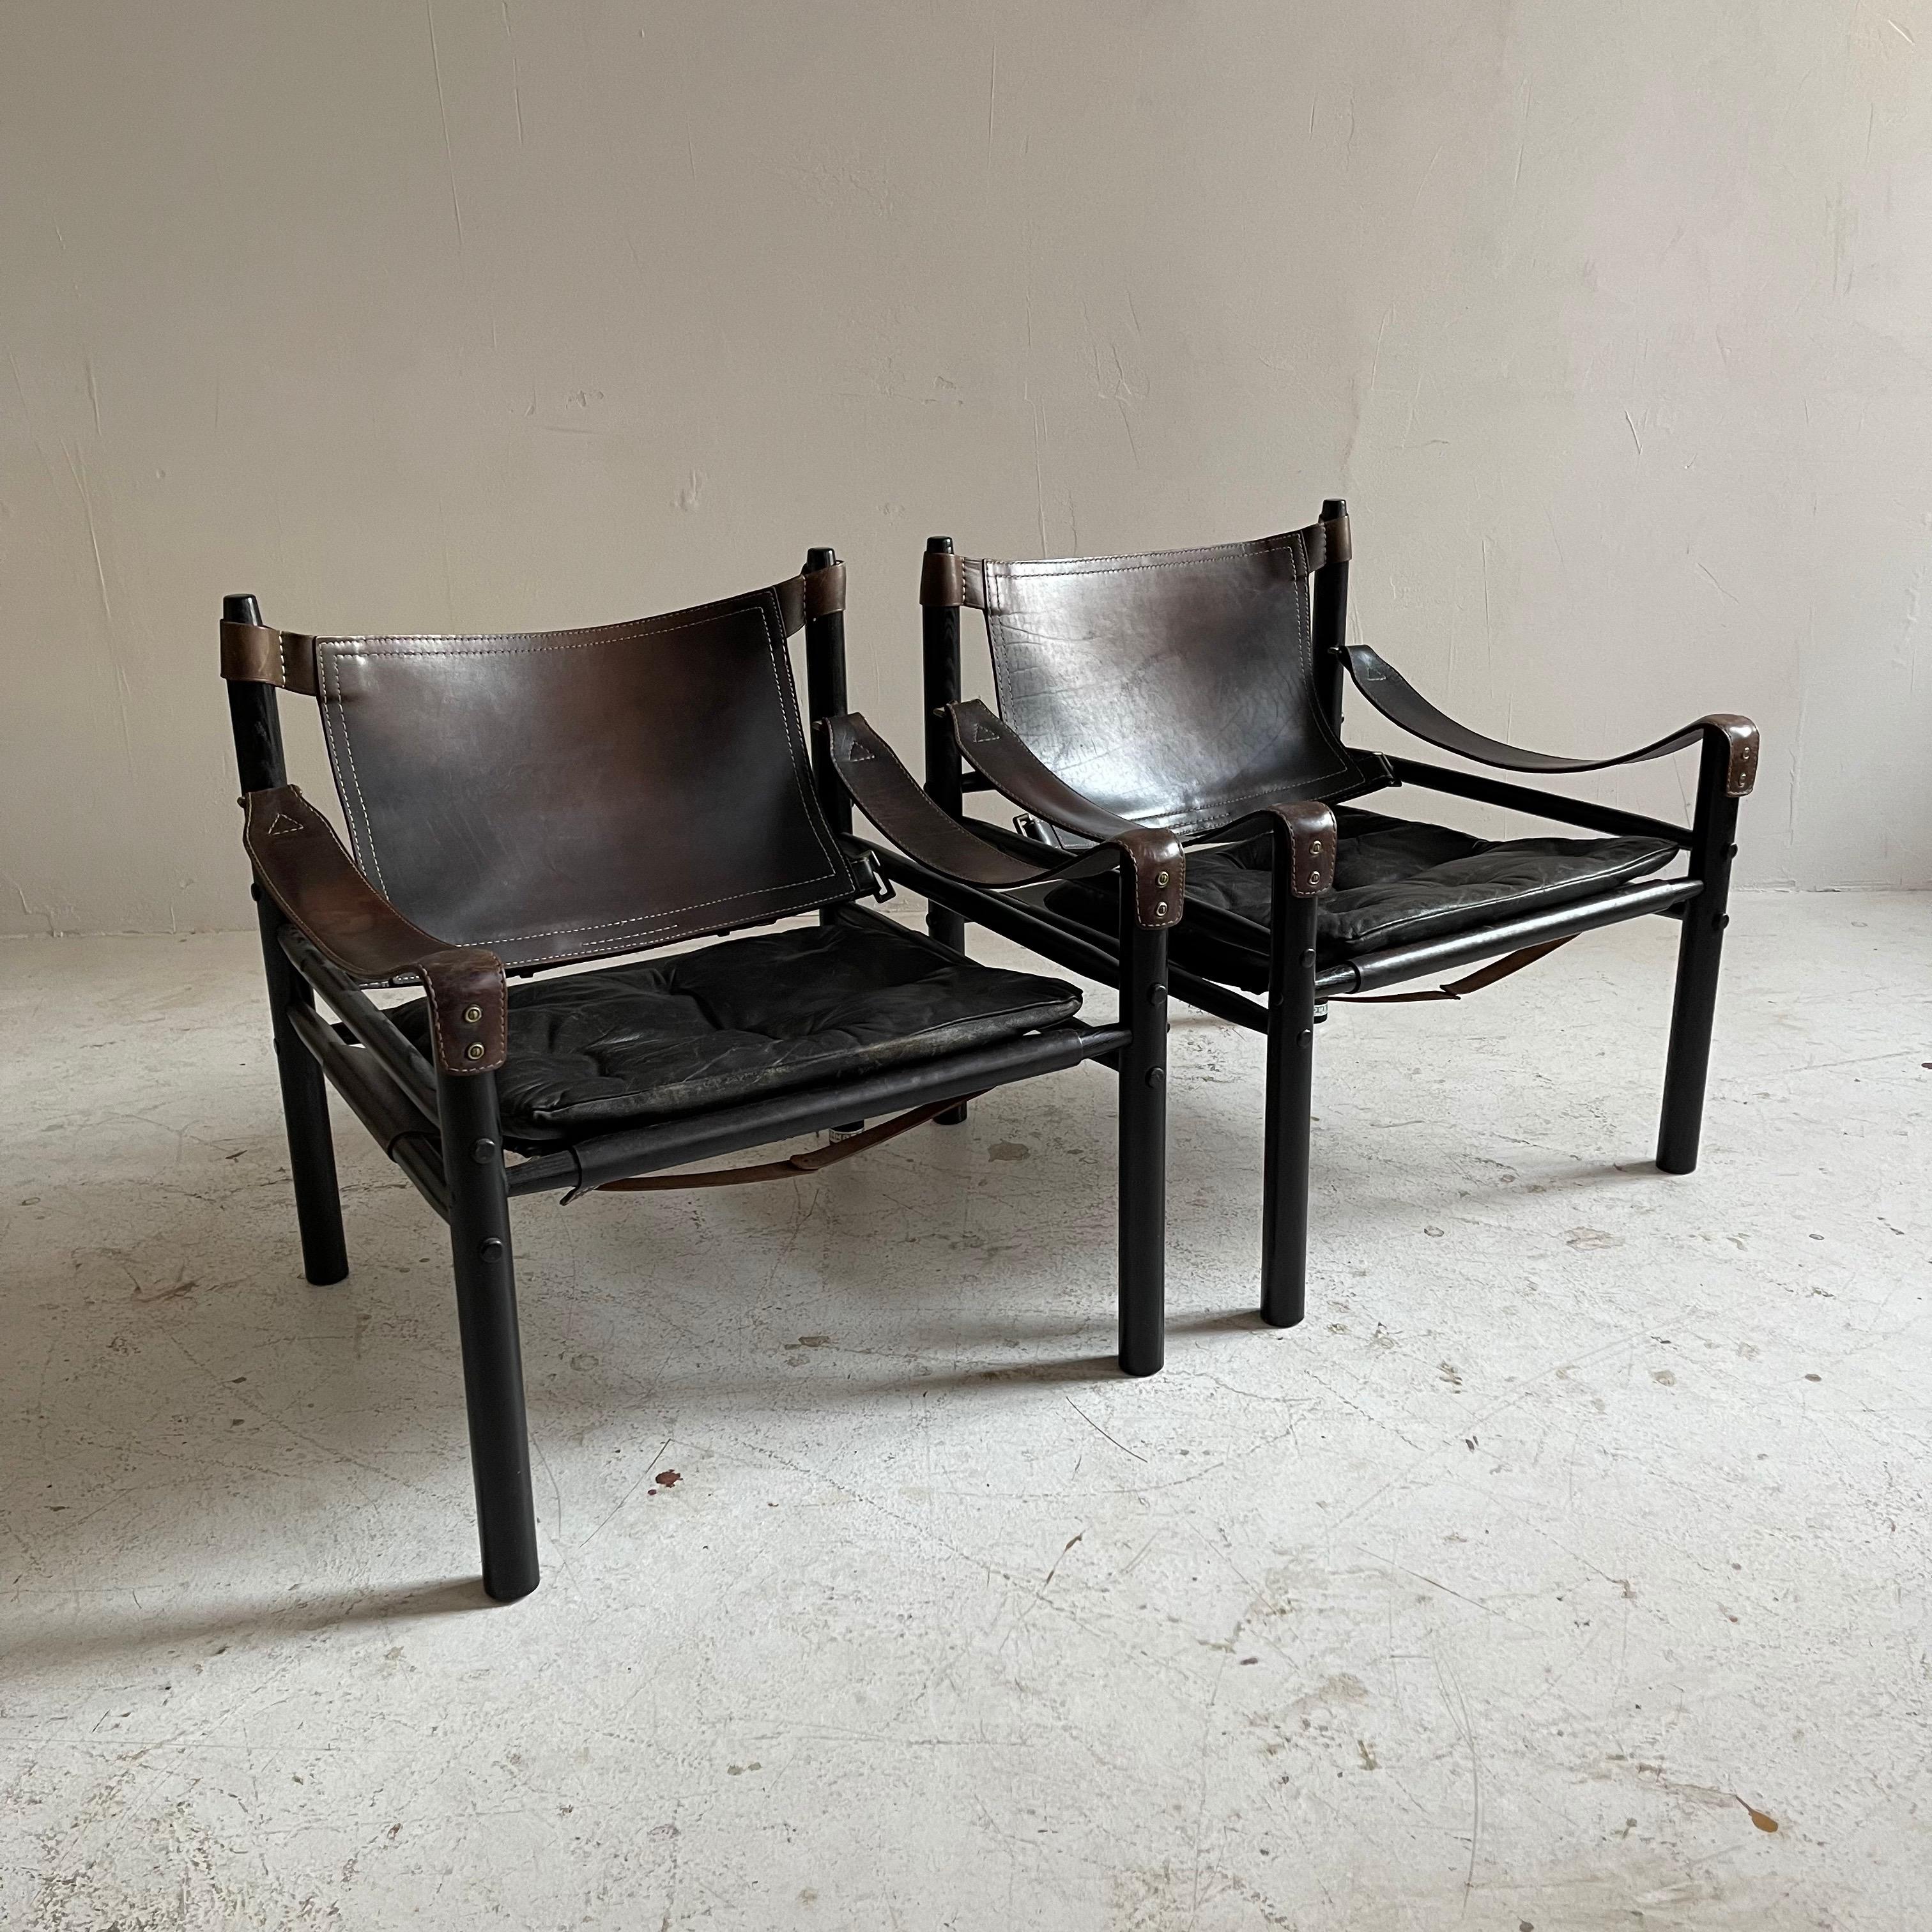 Arne Norell Sirocco Safari chairs, set of two, Sweden 1960s.